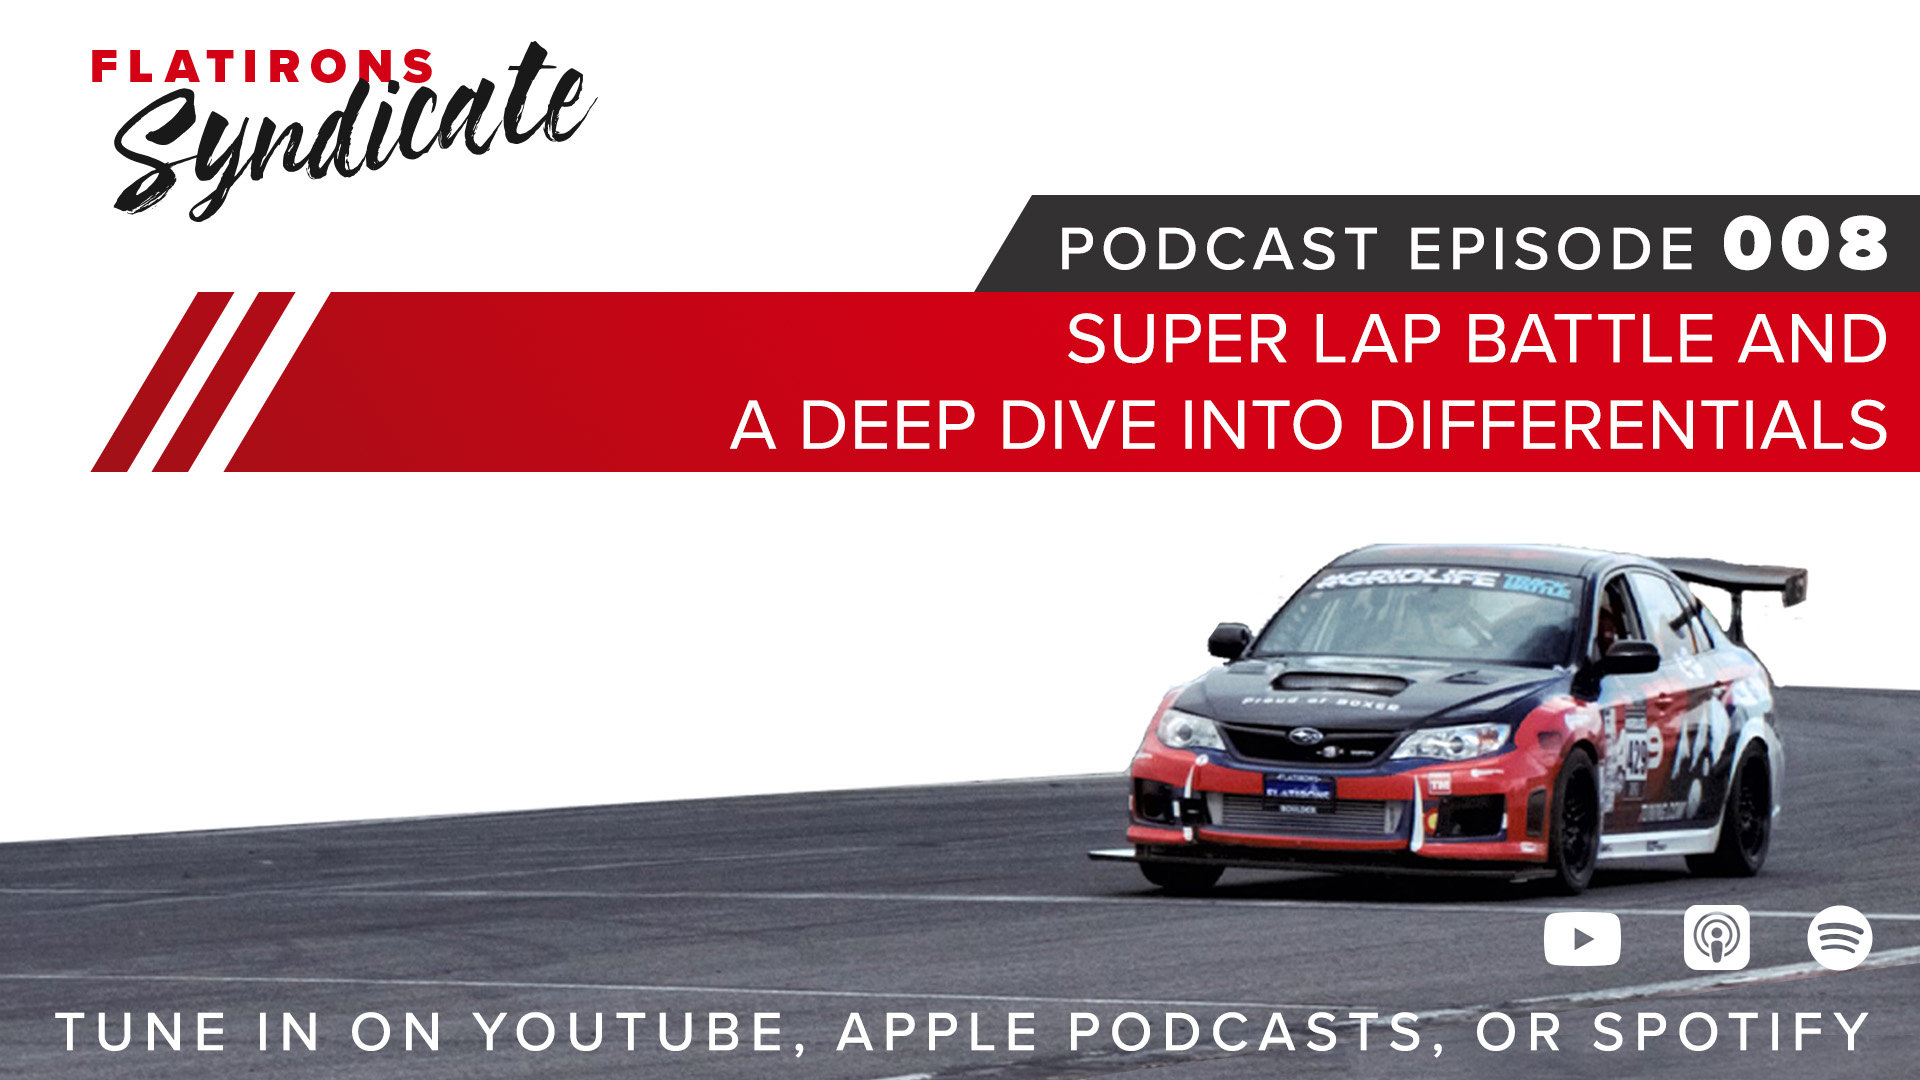 Catching Up After Super Lap Battle, and a Deep Dive into Differentials